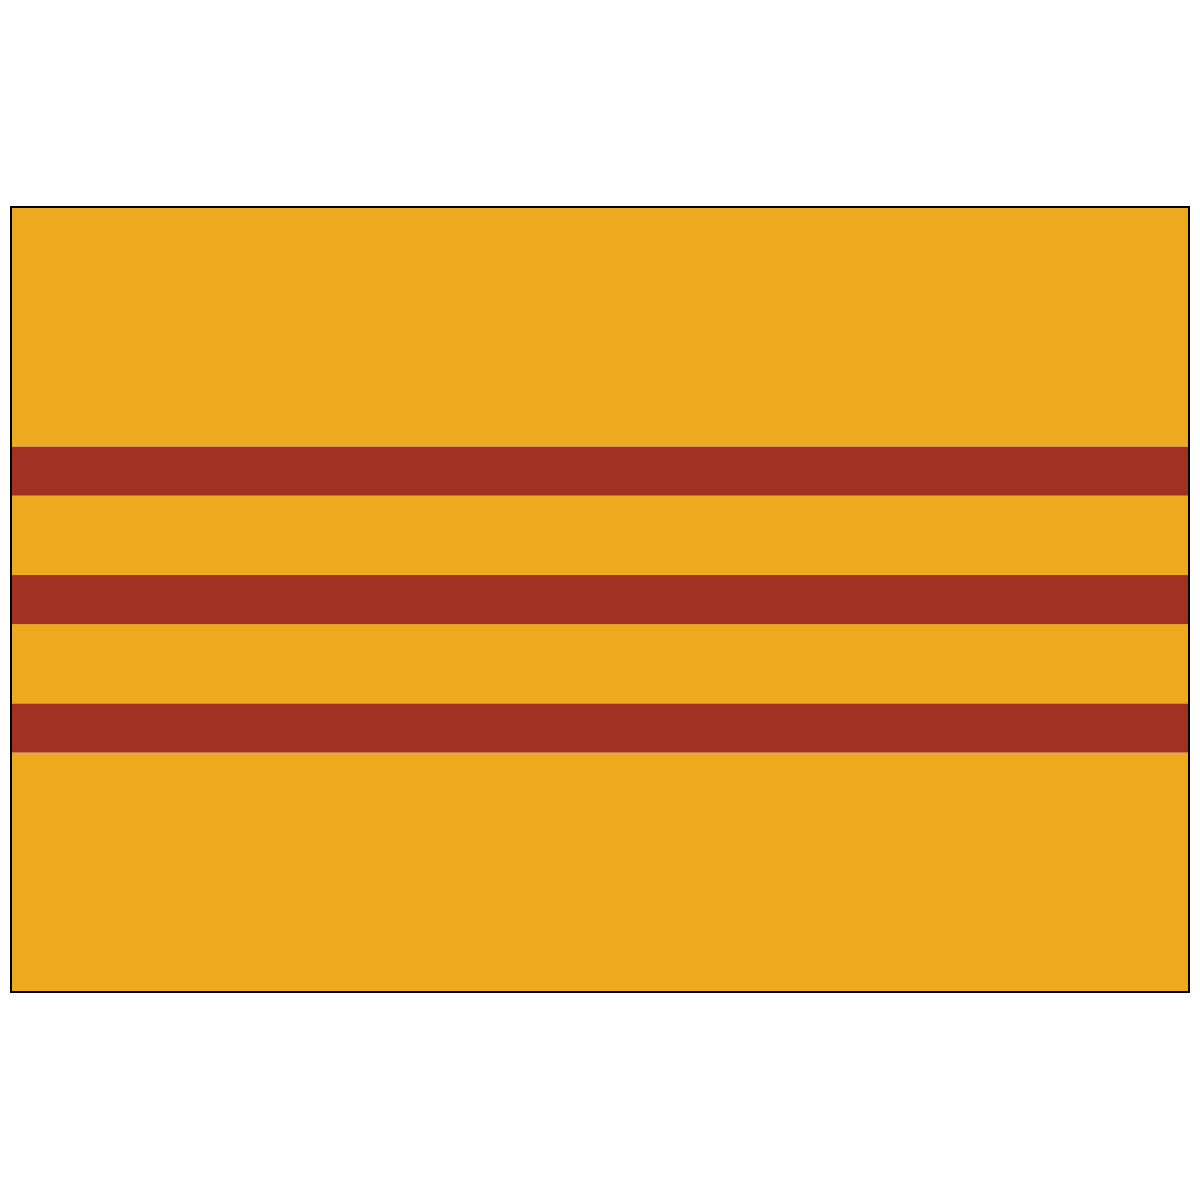 South-Vietnam-Flag-National-Flags-International-Flags-Country Flags-Flagsource Southeast-Woodstock-GA